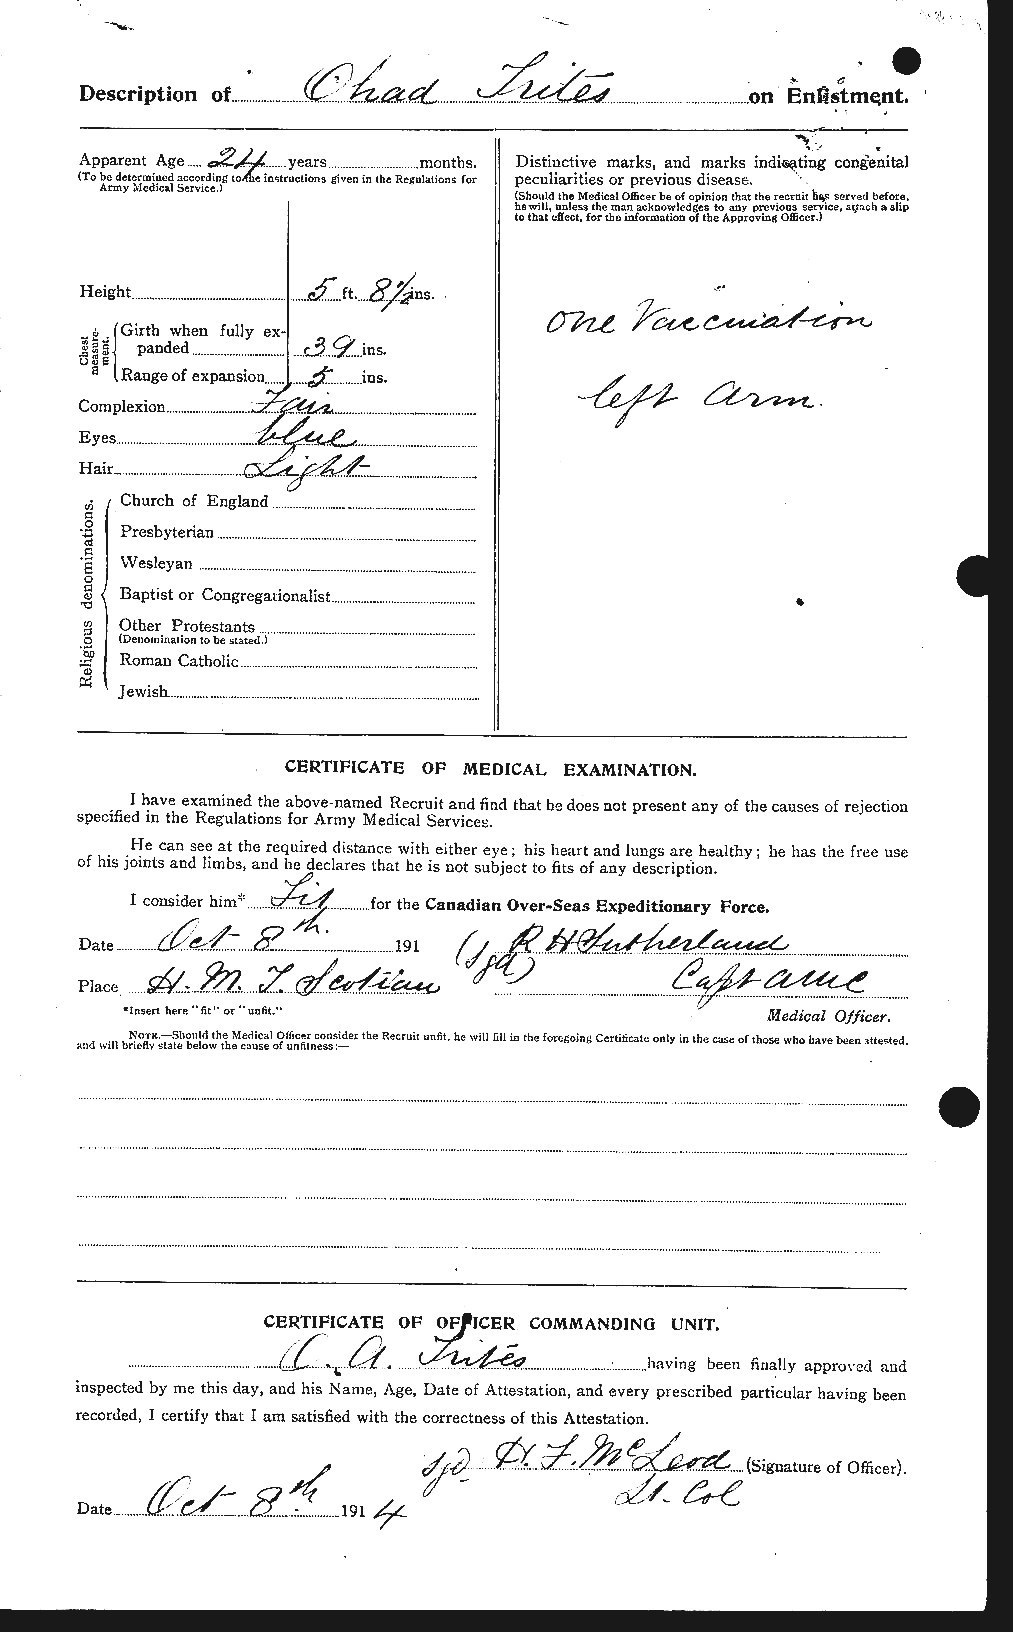 Personnel Records of the First World War - CEF 640158b